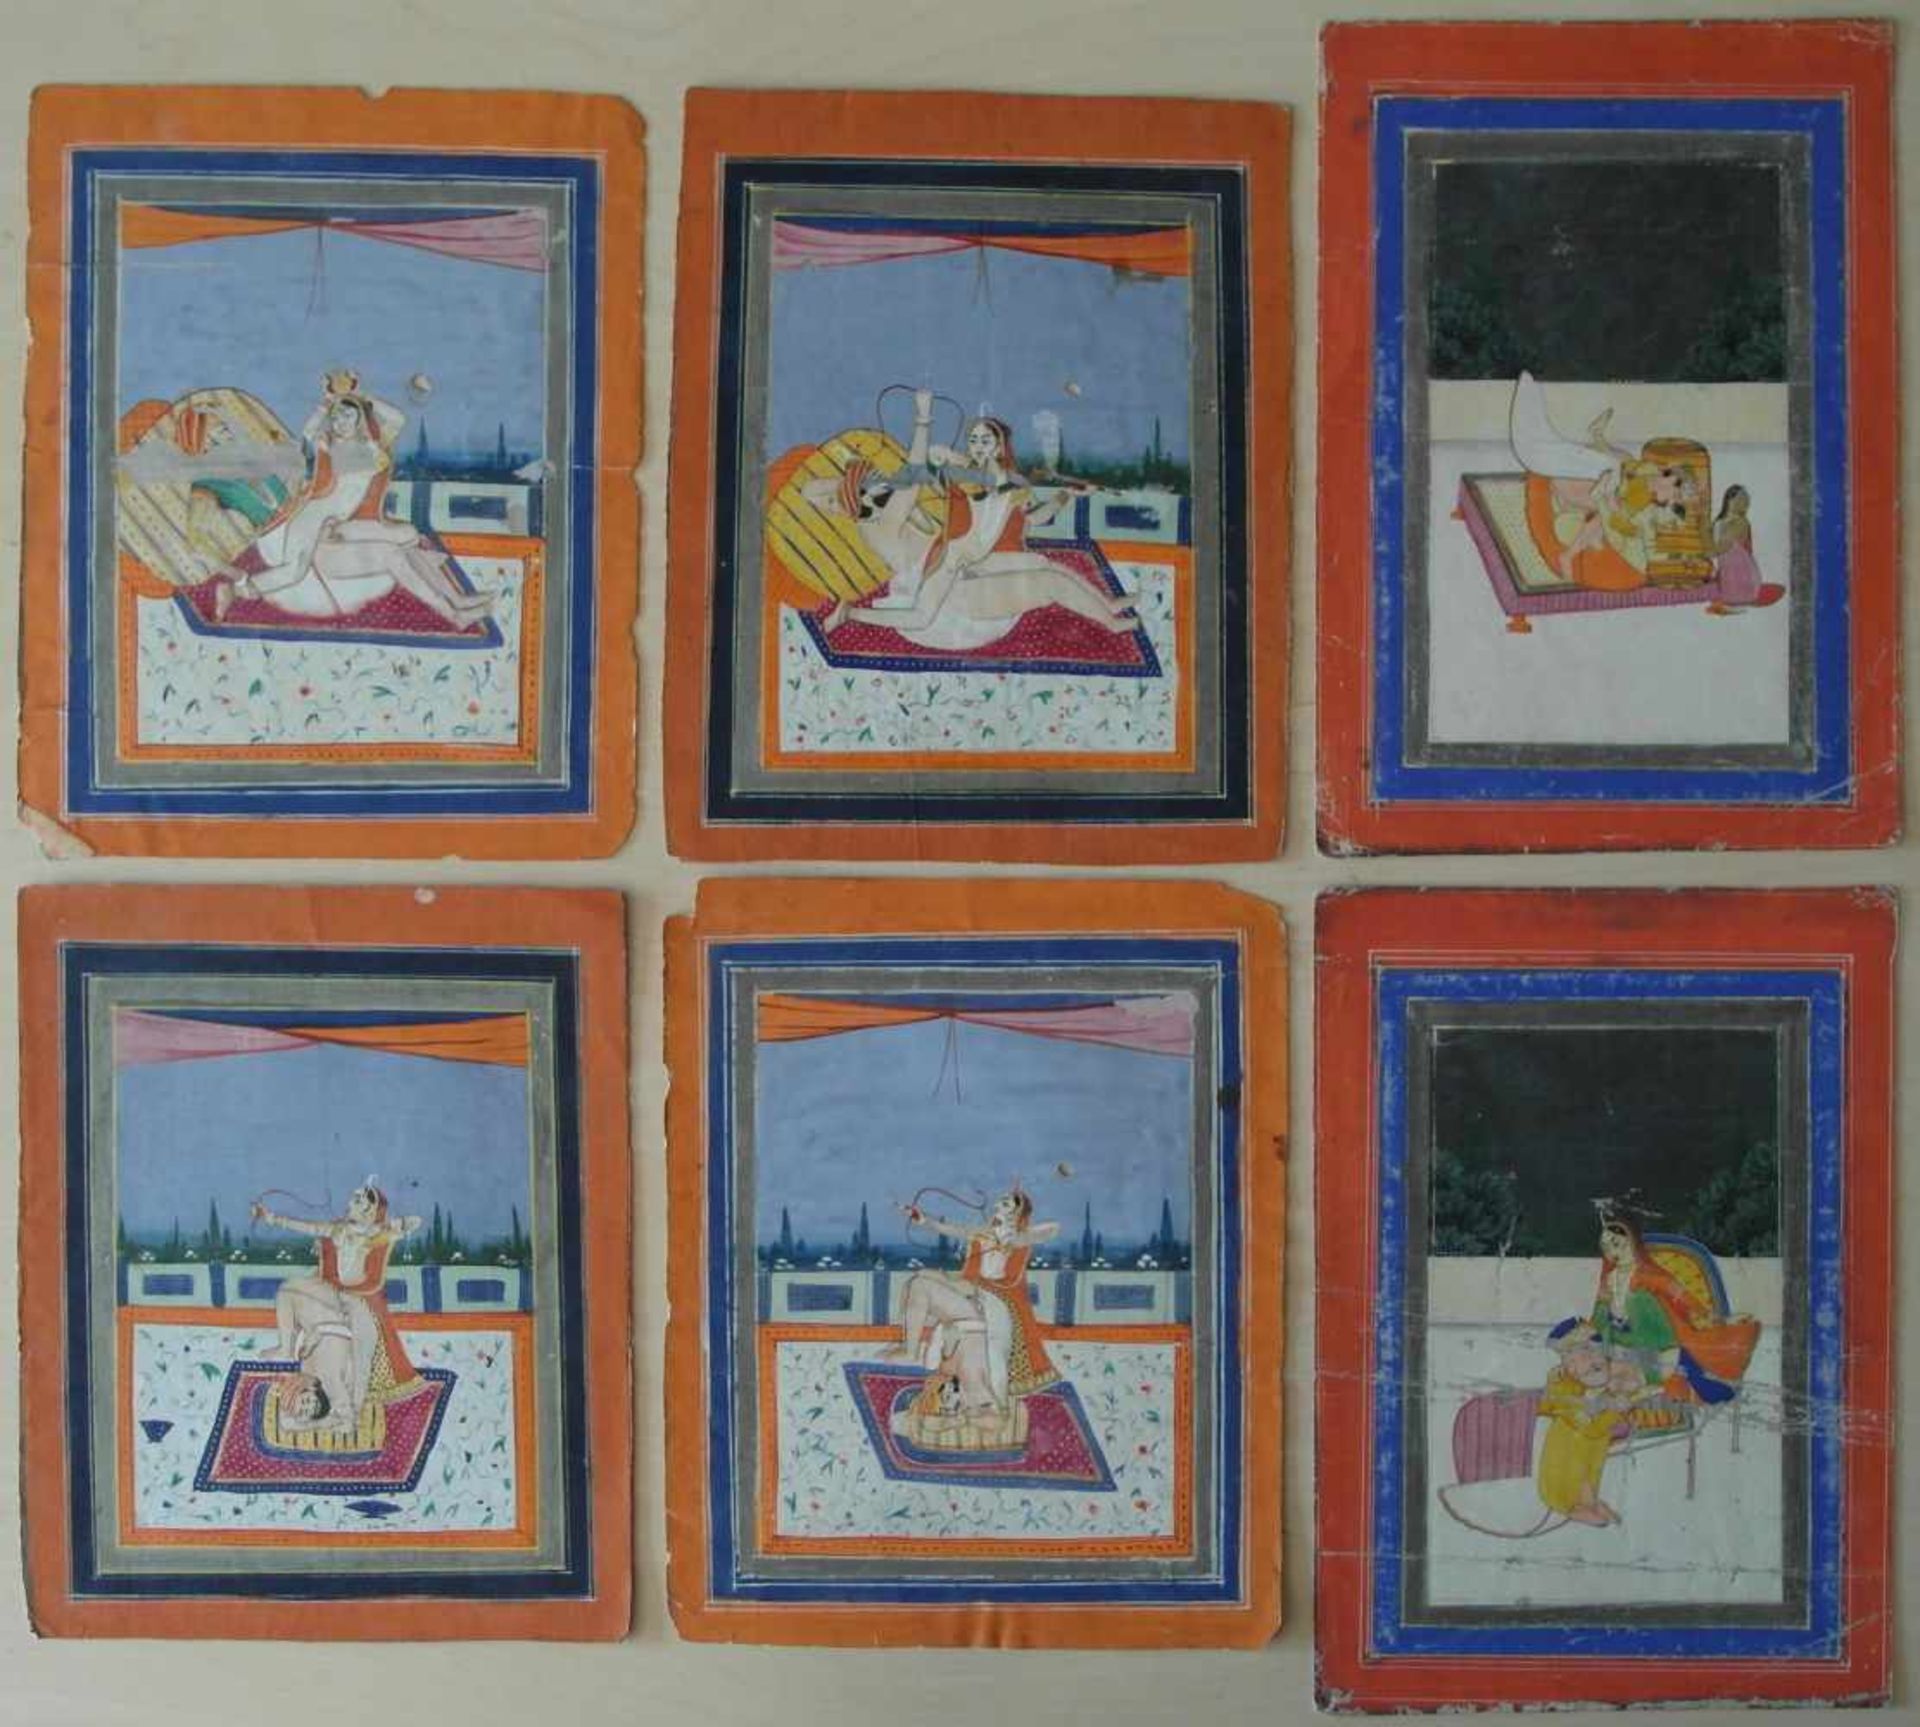 EIGHT EROTIC PAINTINGS. East India. Rajasthan, prob. Jaipur. Late 19th/beg. 20th c. Pigments and - Bild 2 aus 2